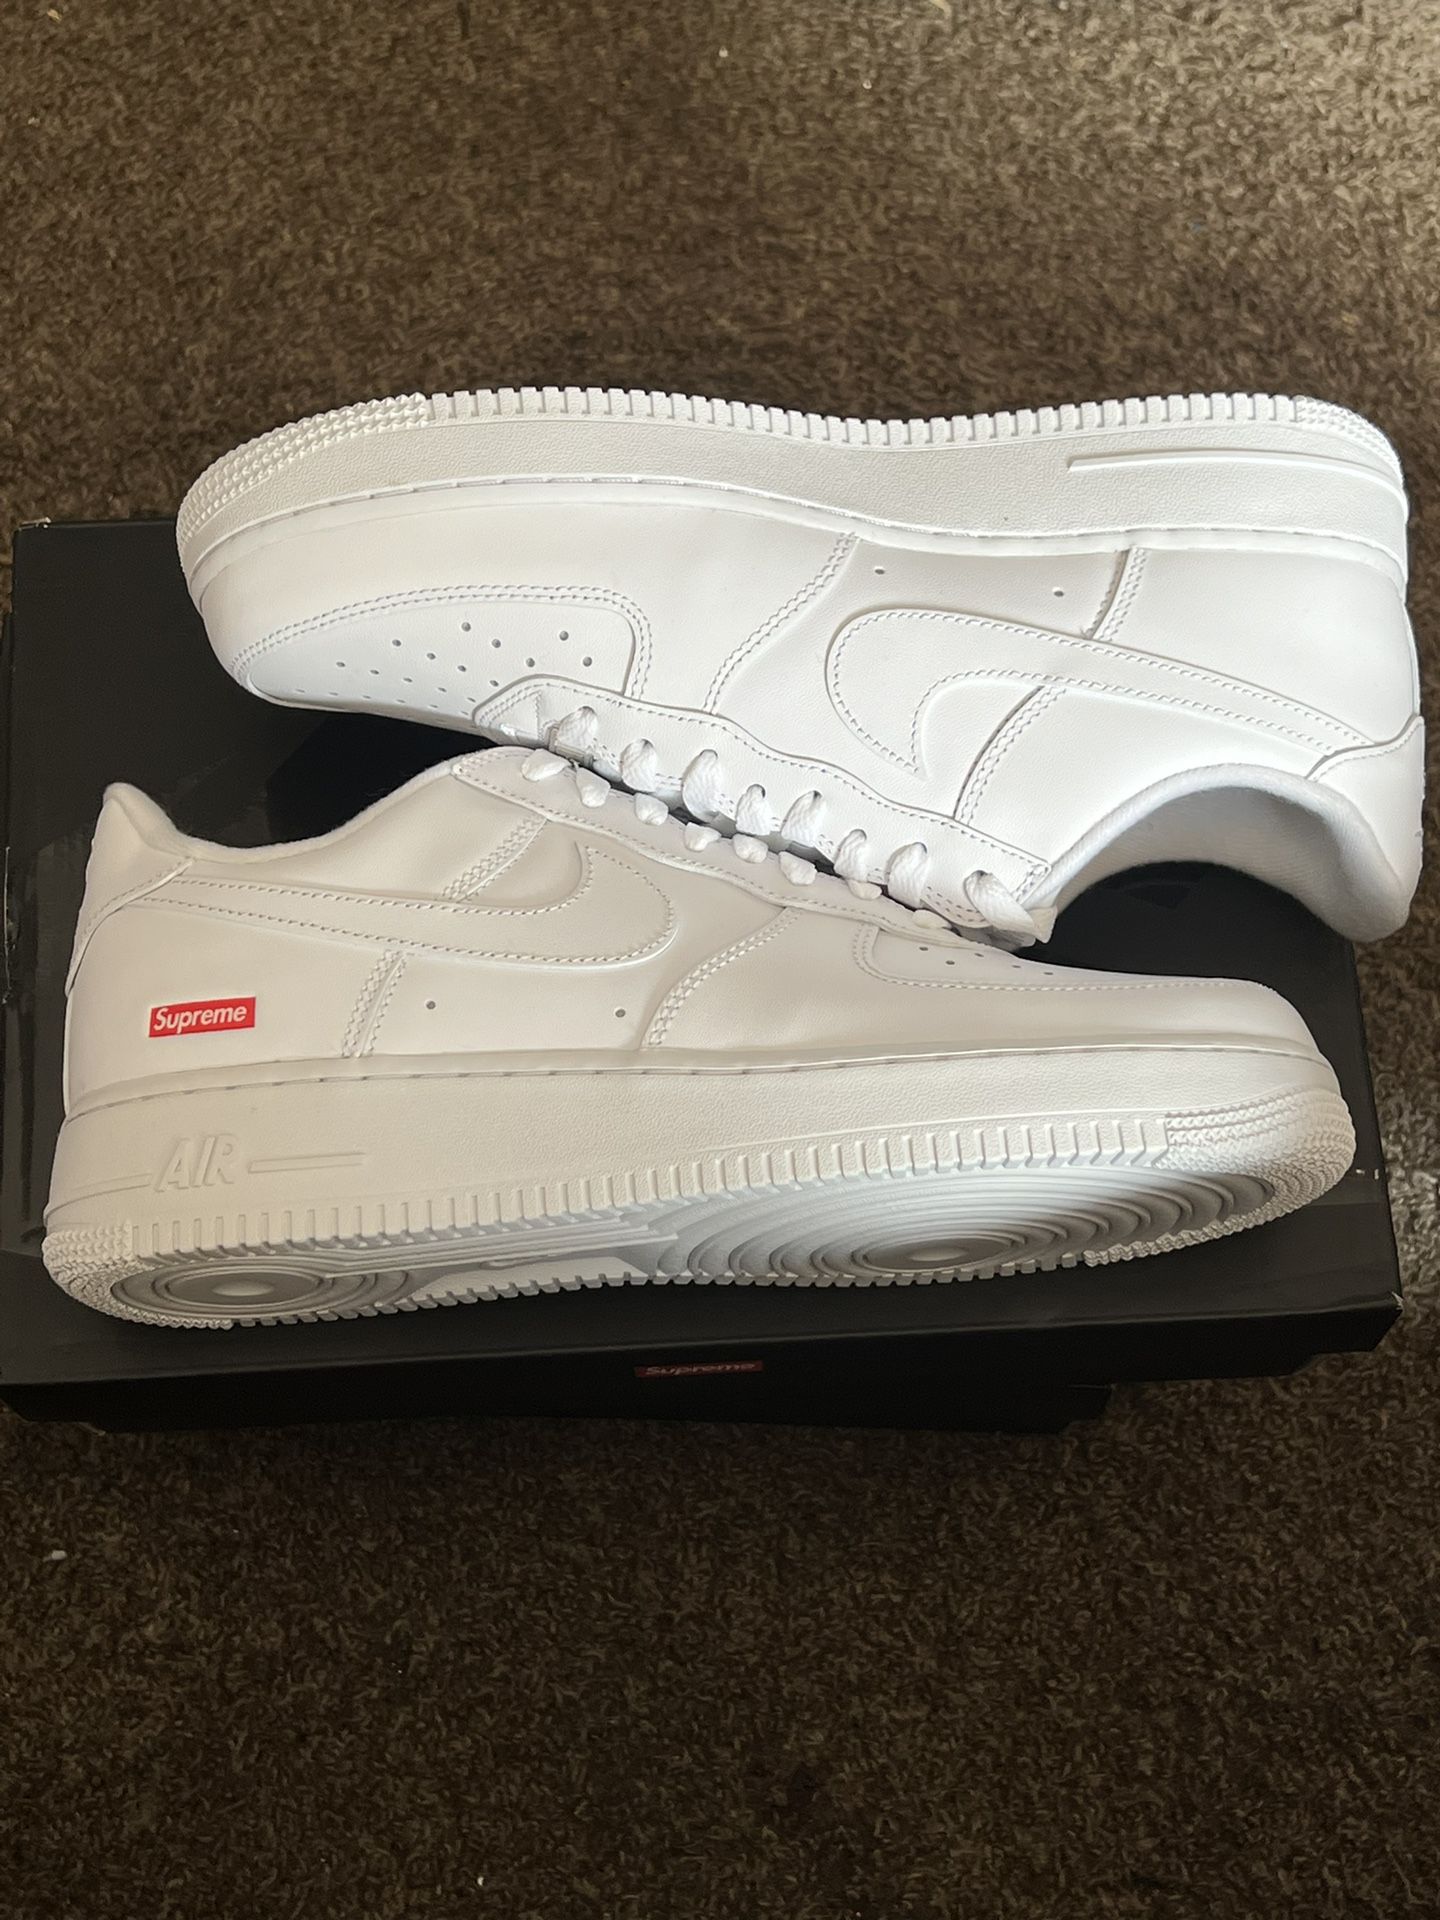 Nike Supreme Air Force One Low